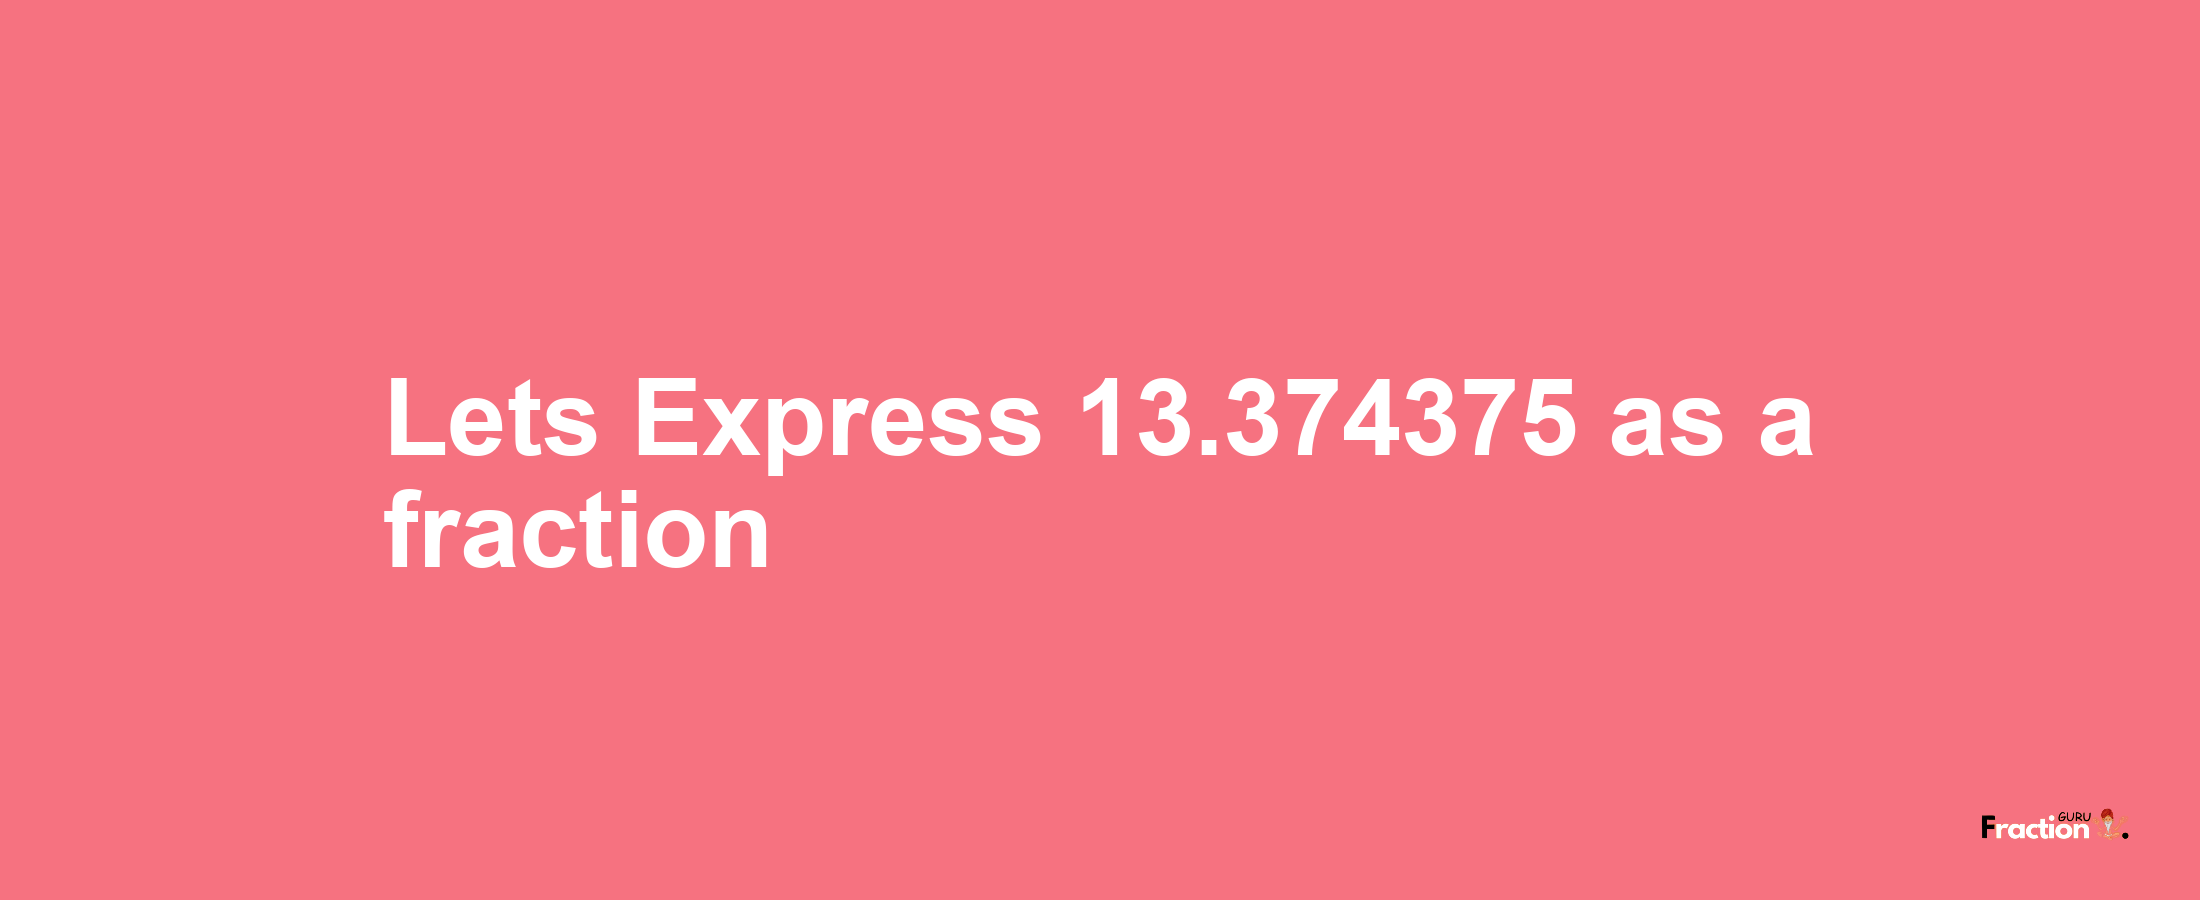 Lets Express 13.374375 as afraction